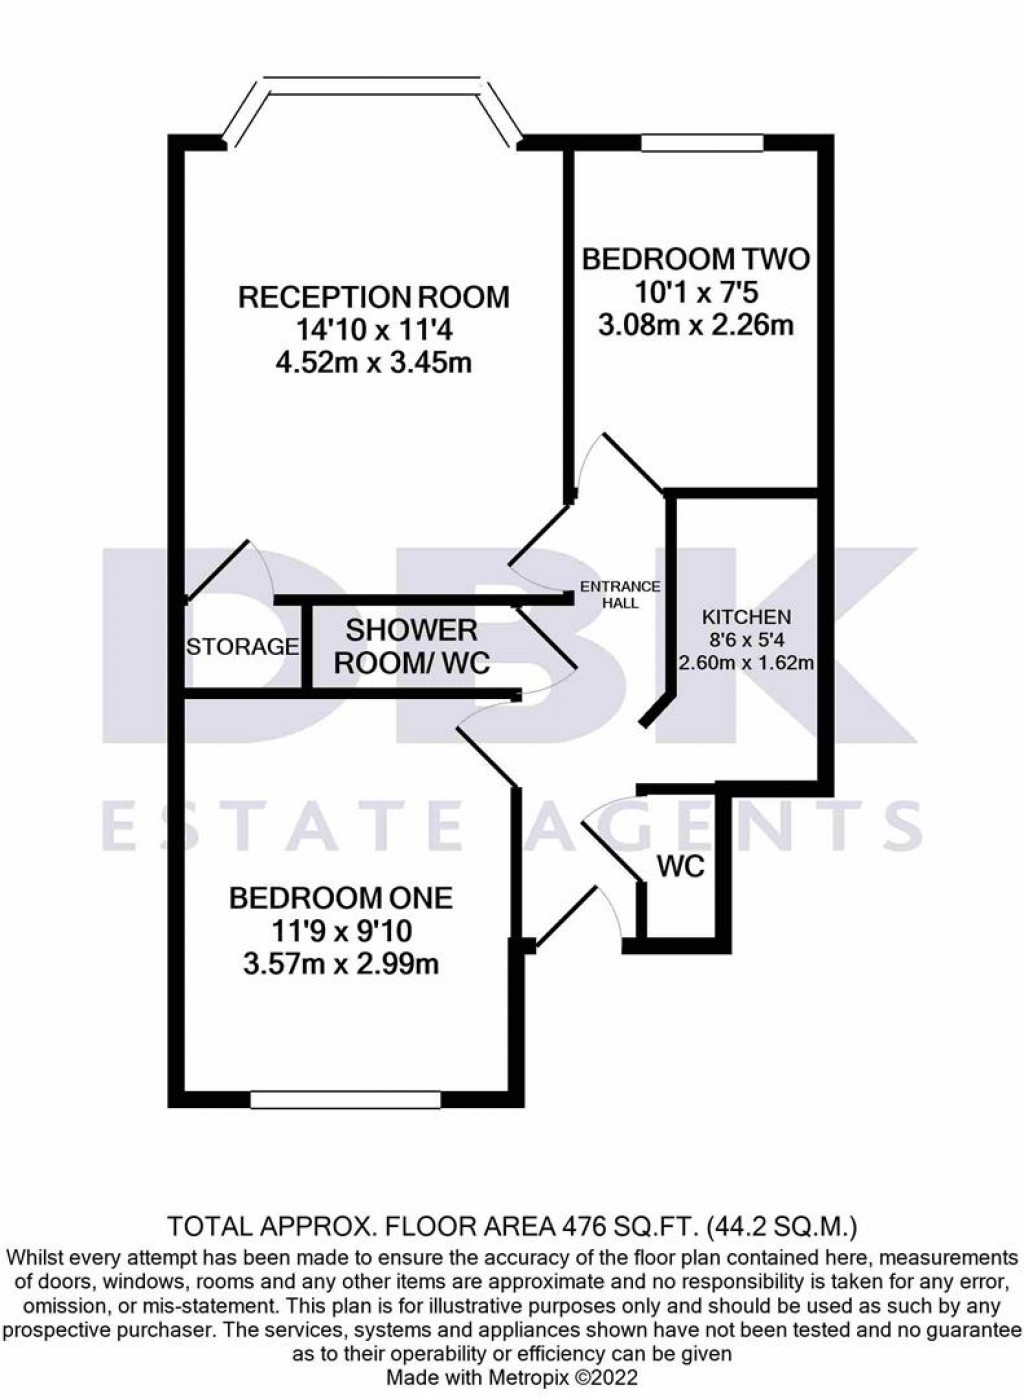 Floorplans For Great West Road, Hounslow, TW5